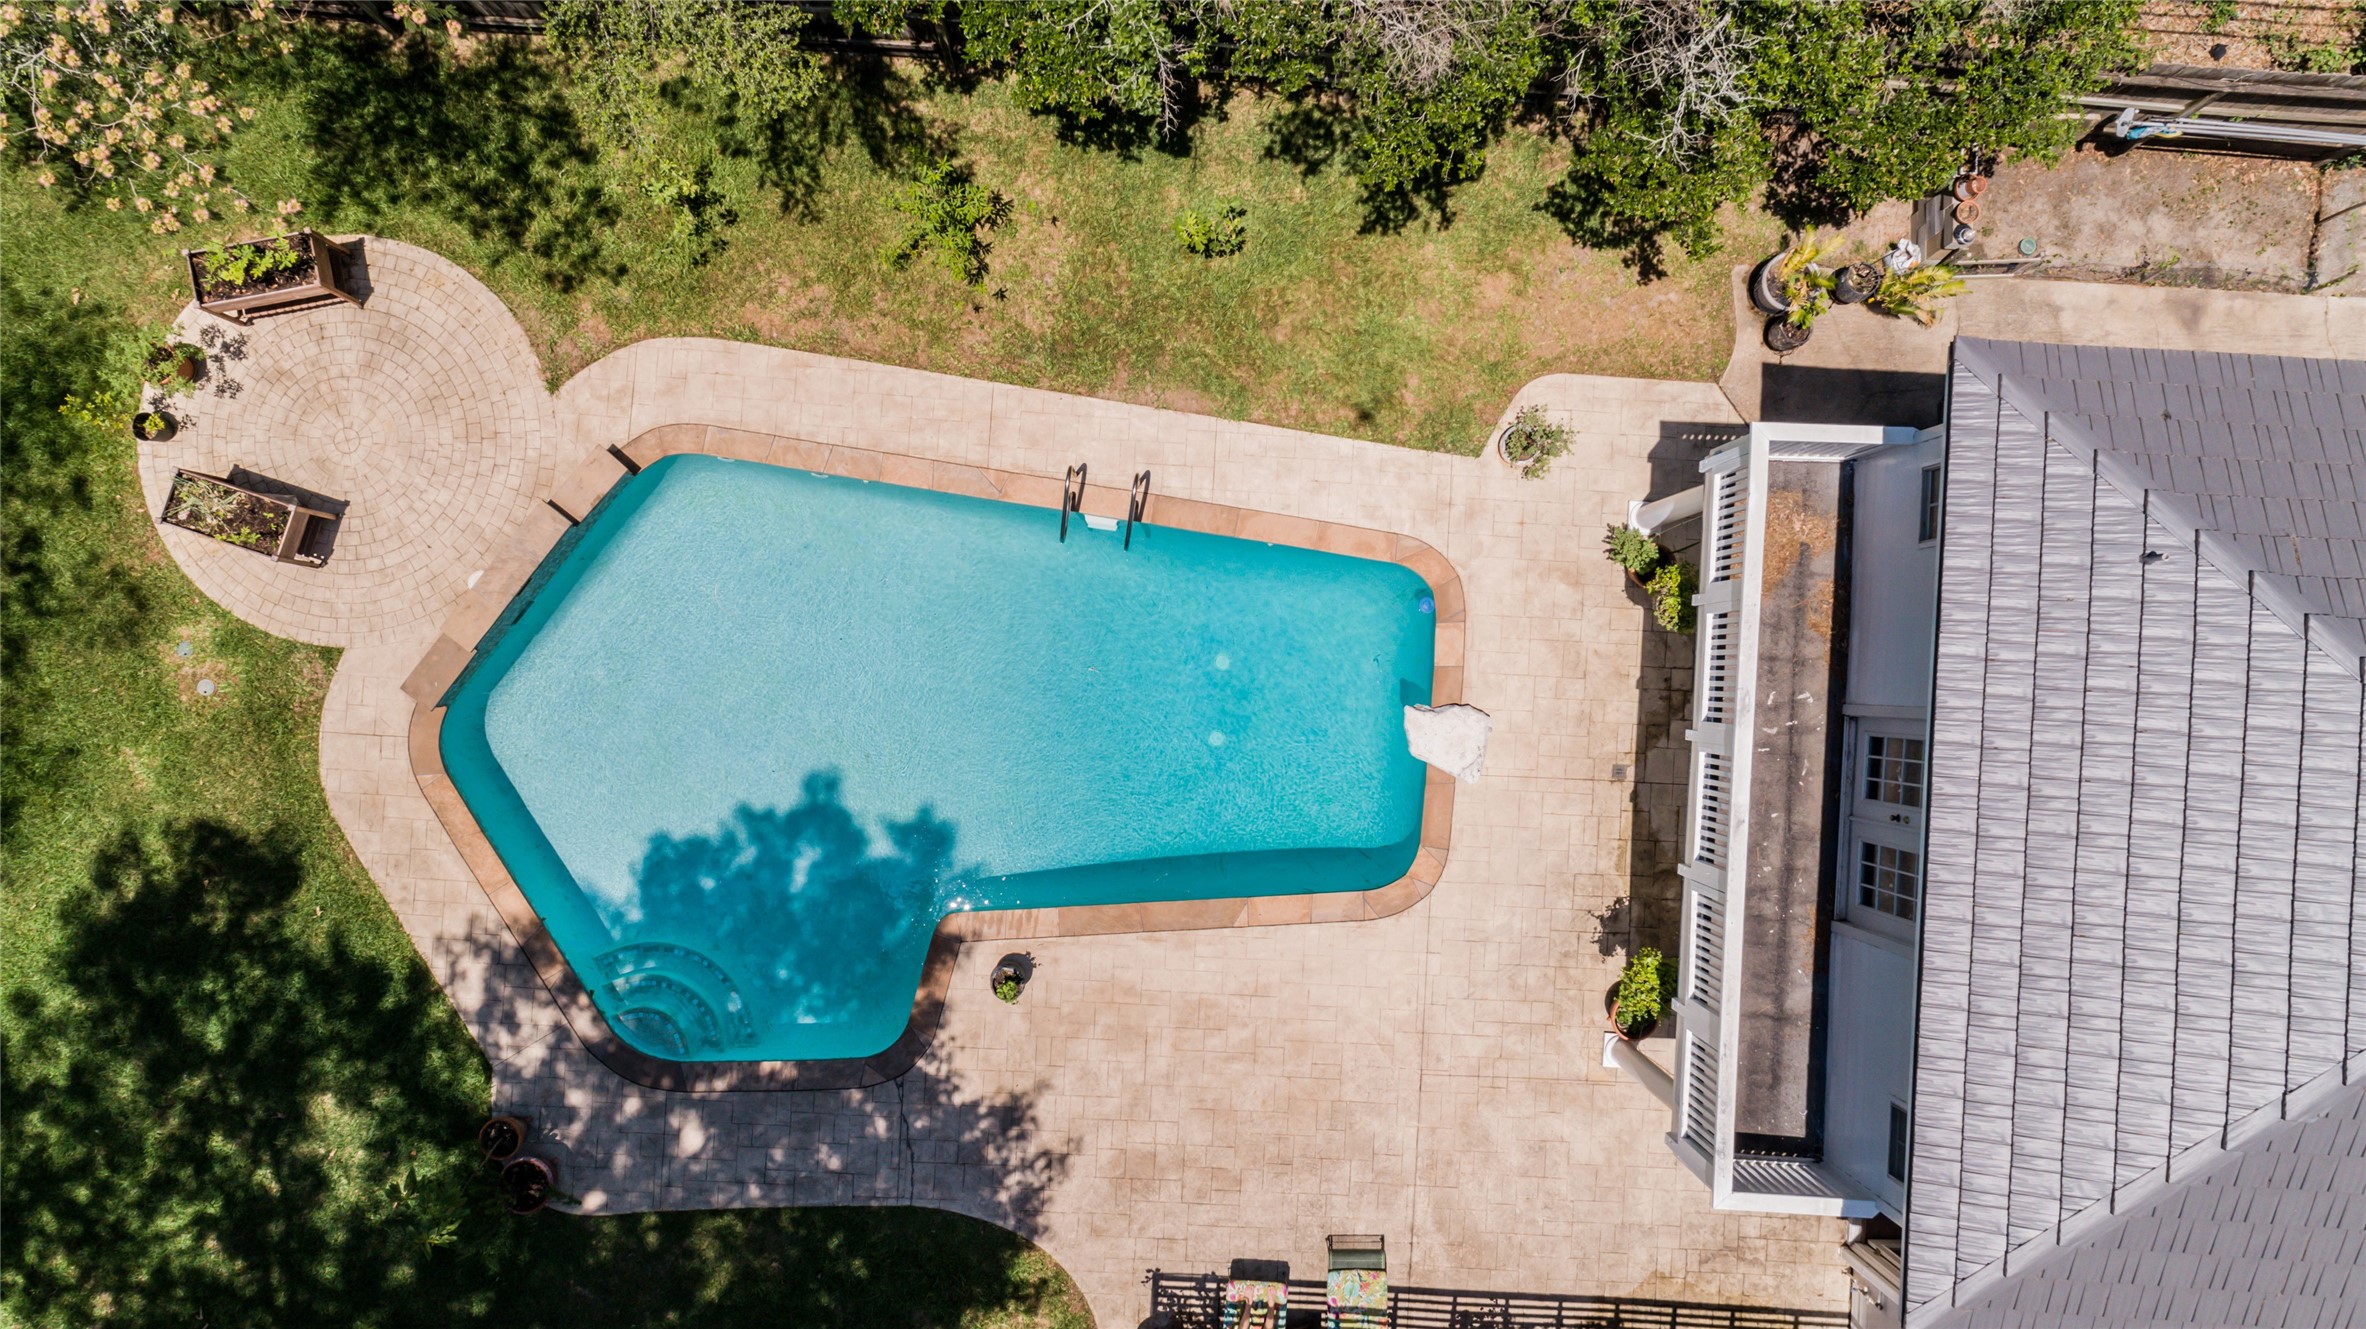 Aerial shot of the pool and backyard.